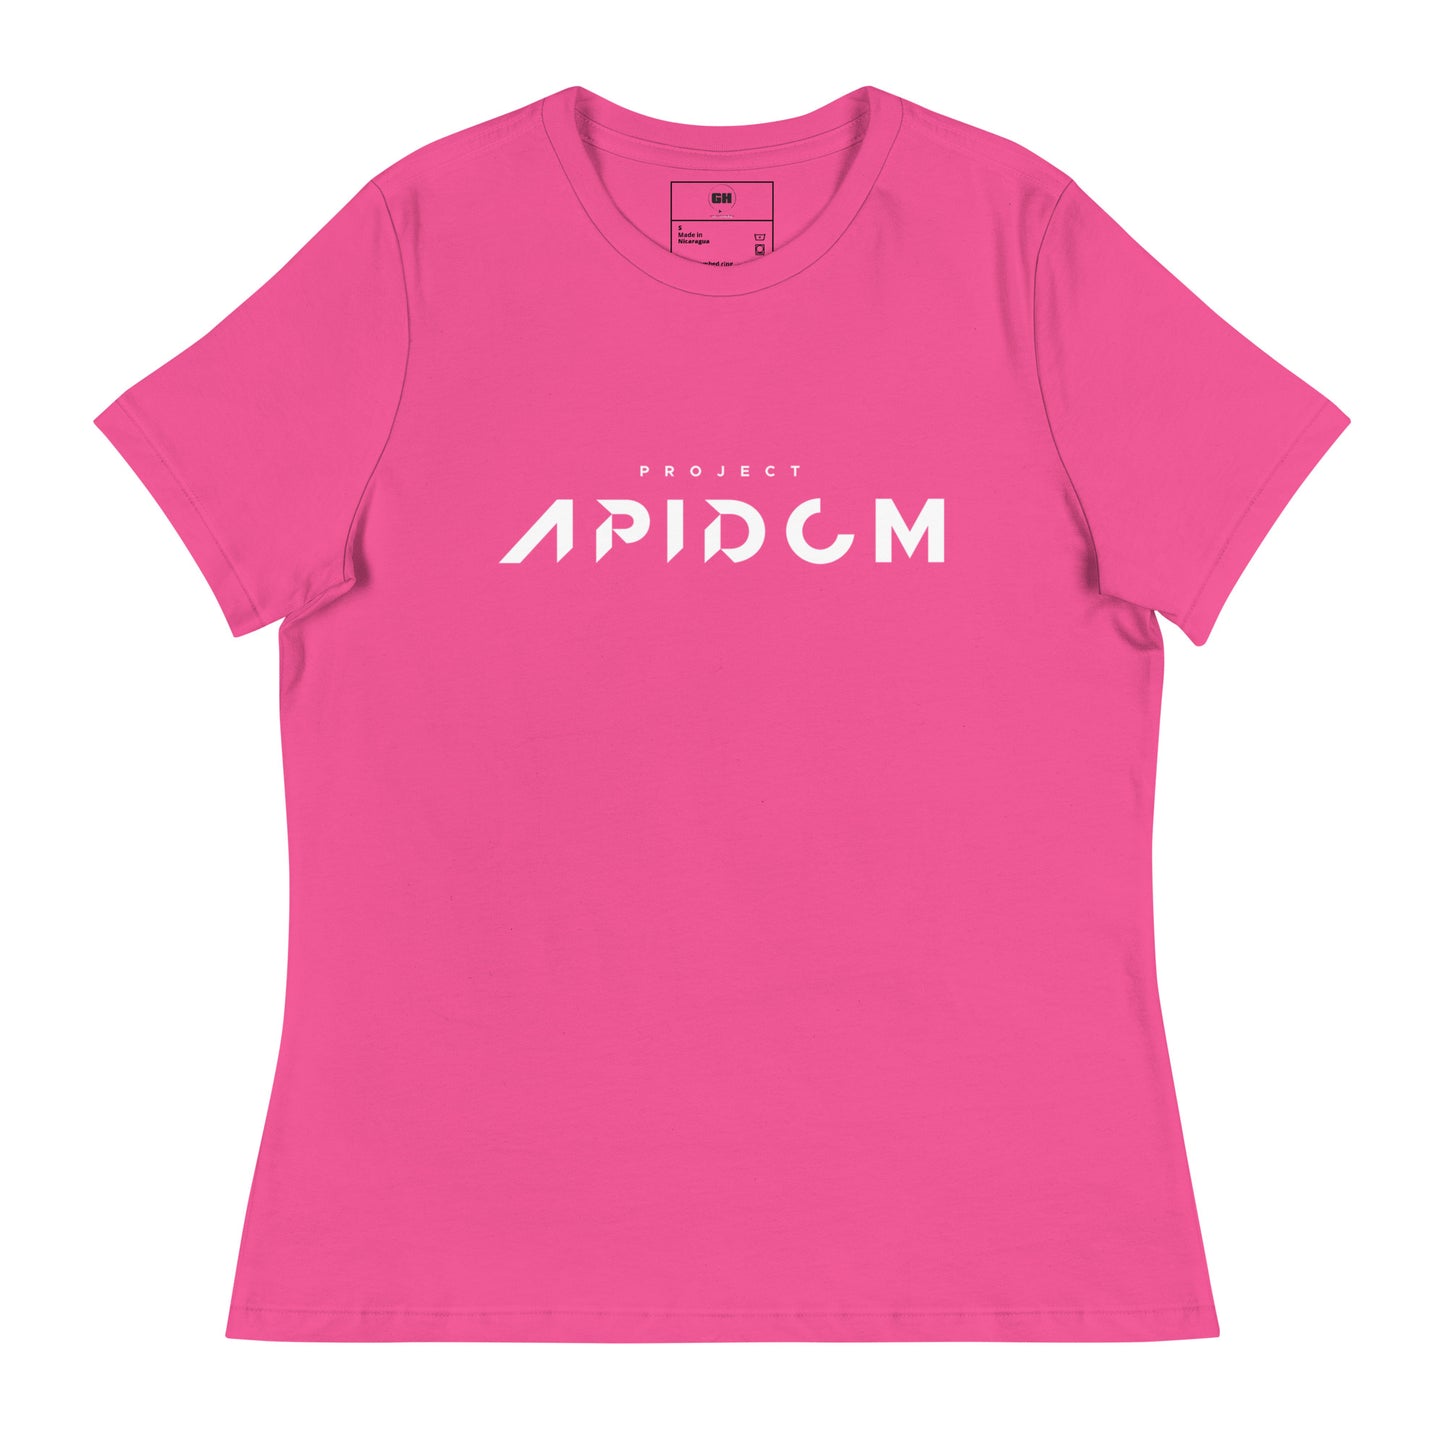 Project_Apidom_2_Women's Relaxed T-Shirt